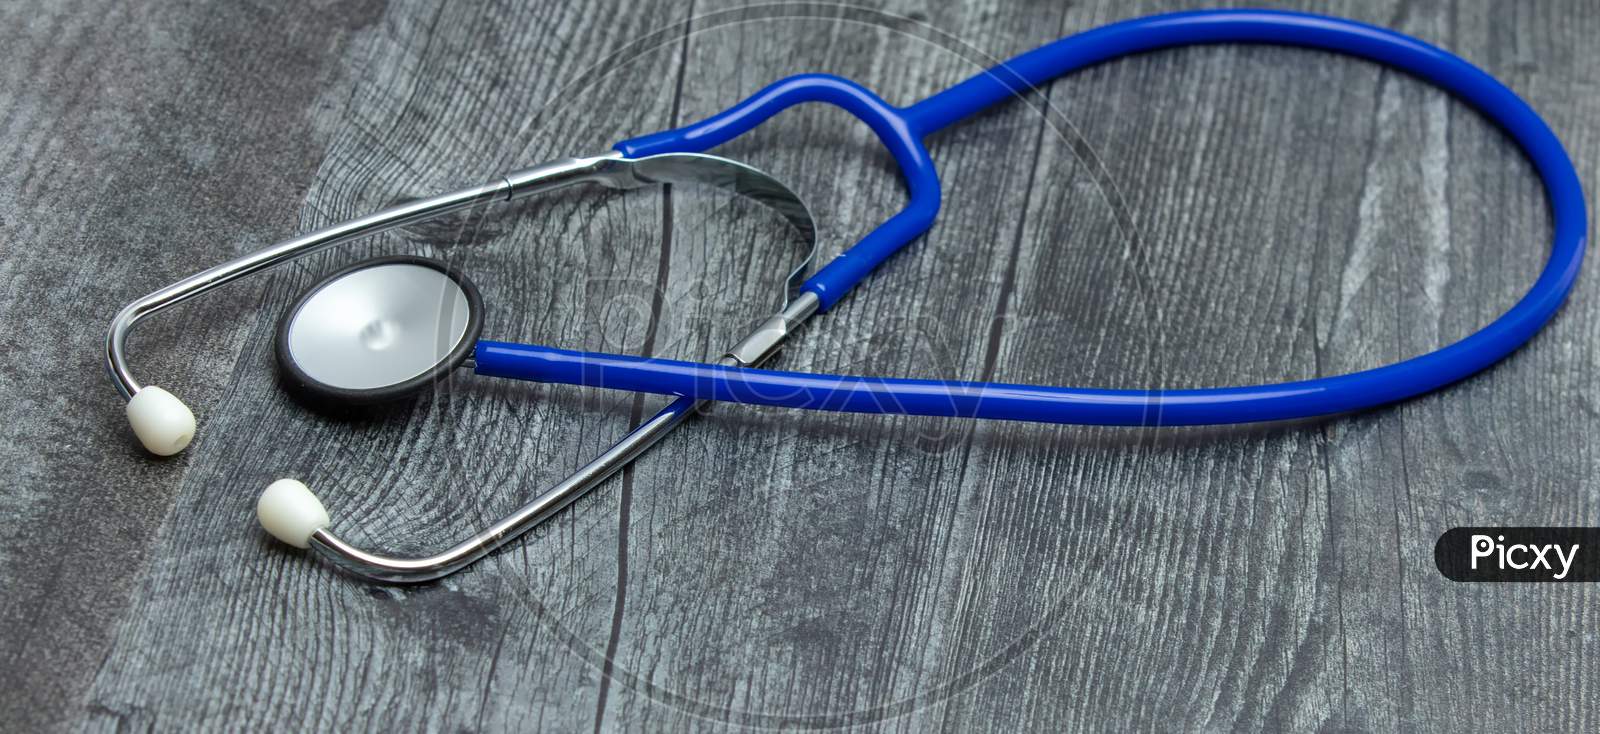 A Blue Medical Stethoscope Isolated On A Wooden Table.